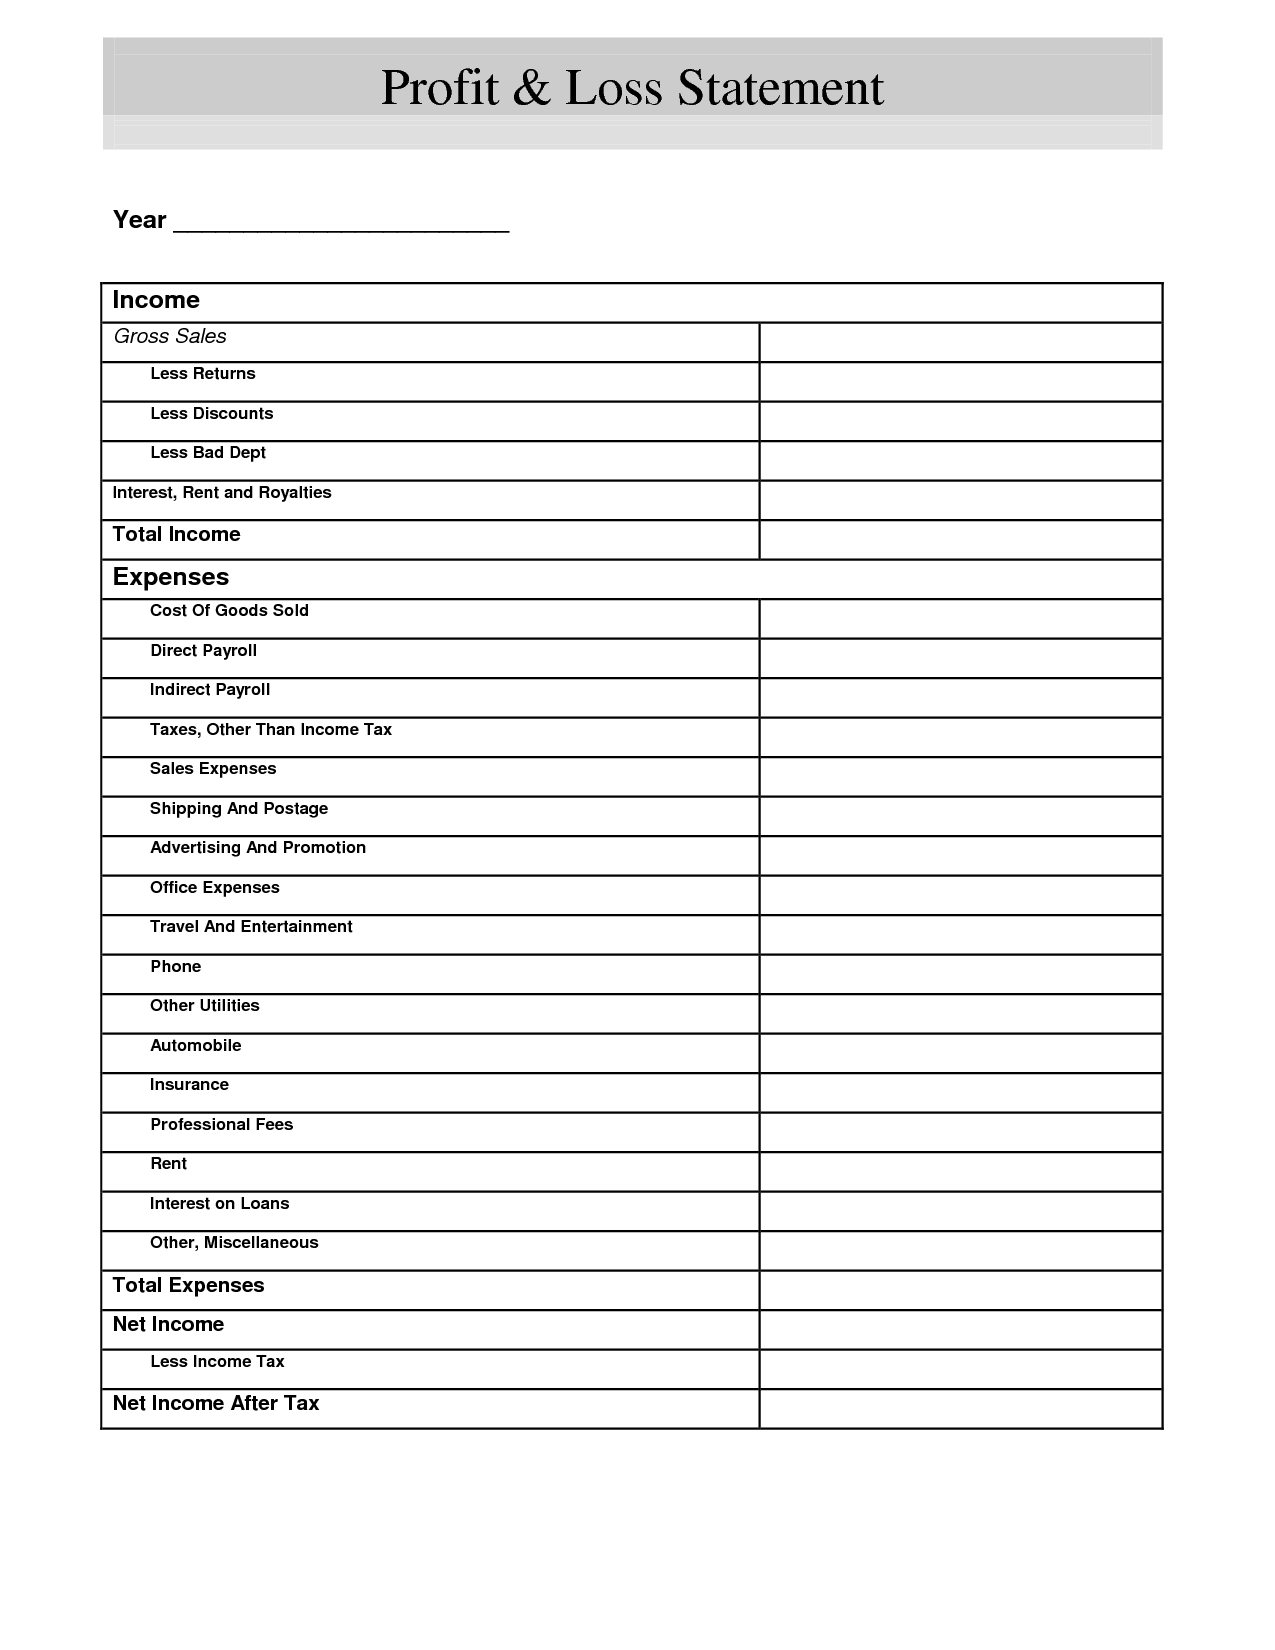 Profit And Loss Template   Fill Online, Printable, Fillable, Blank 